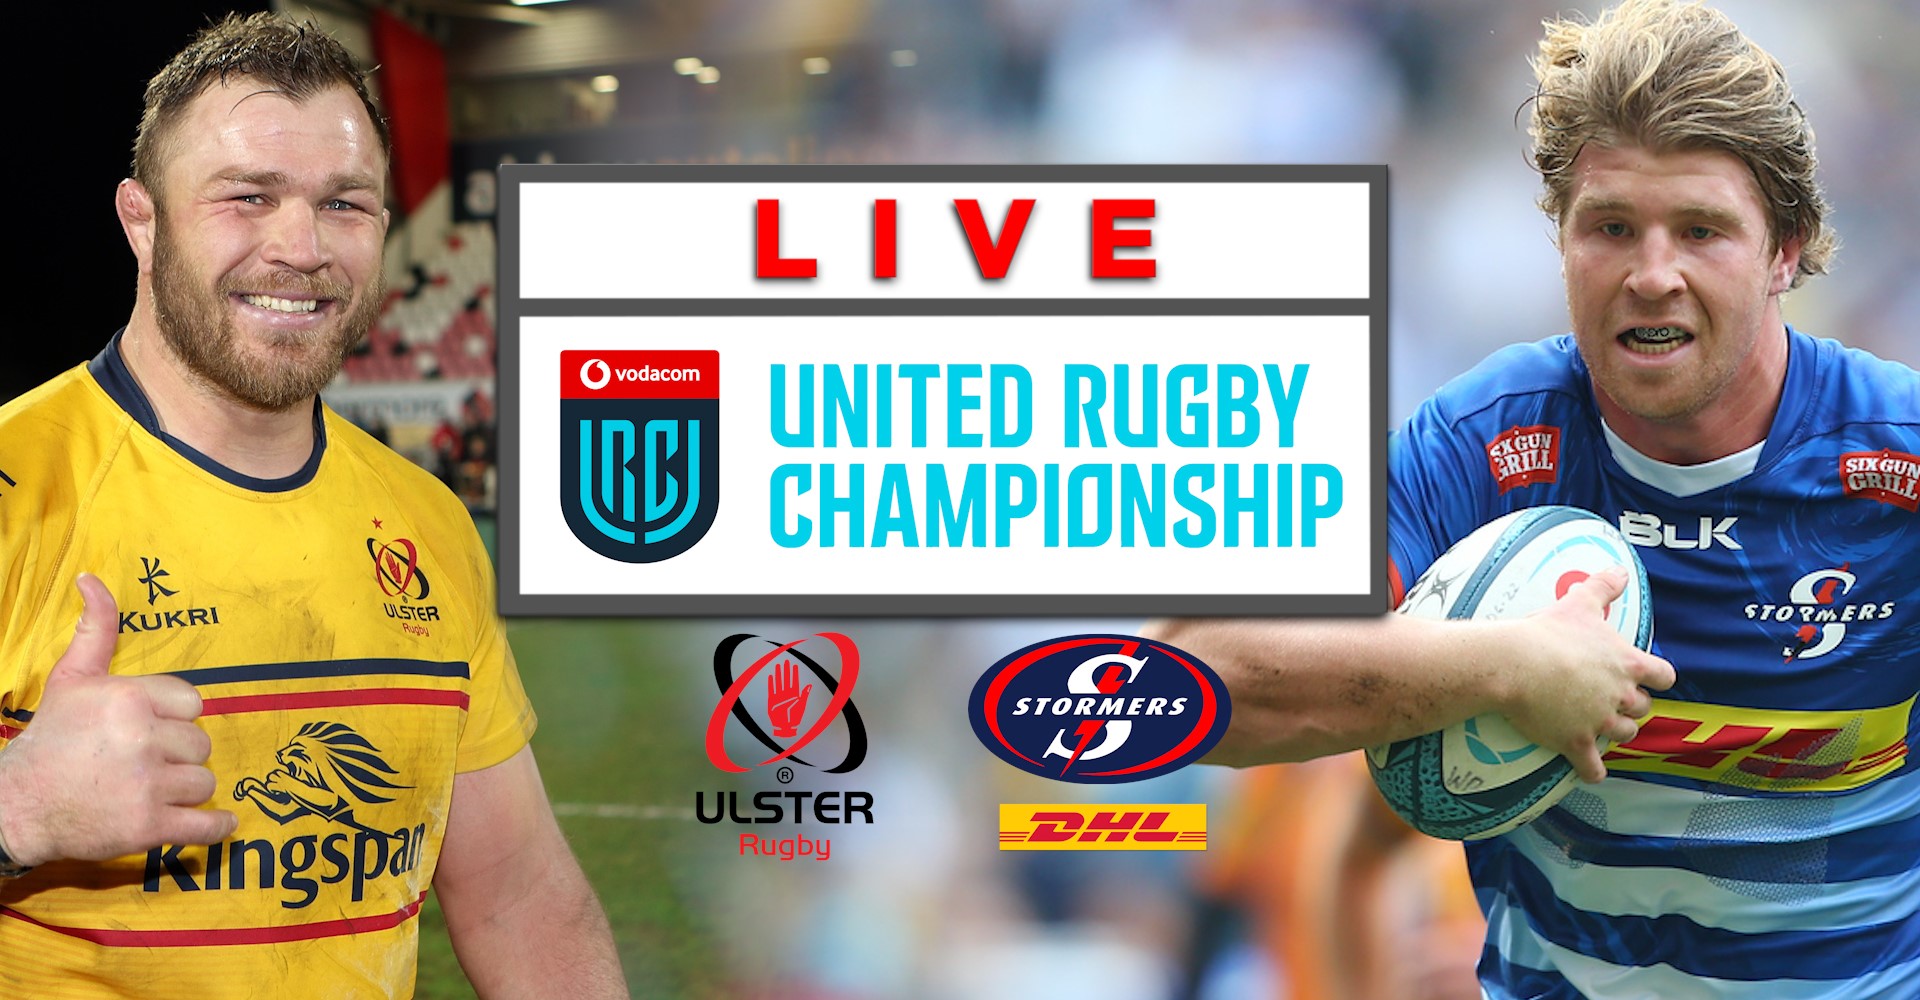 LIVE Ulster vs Stormers